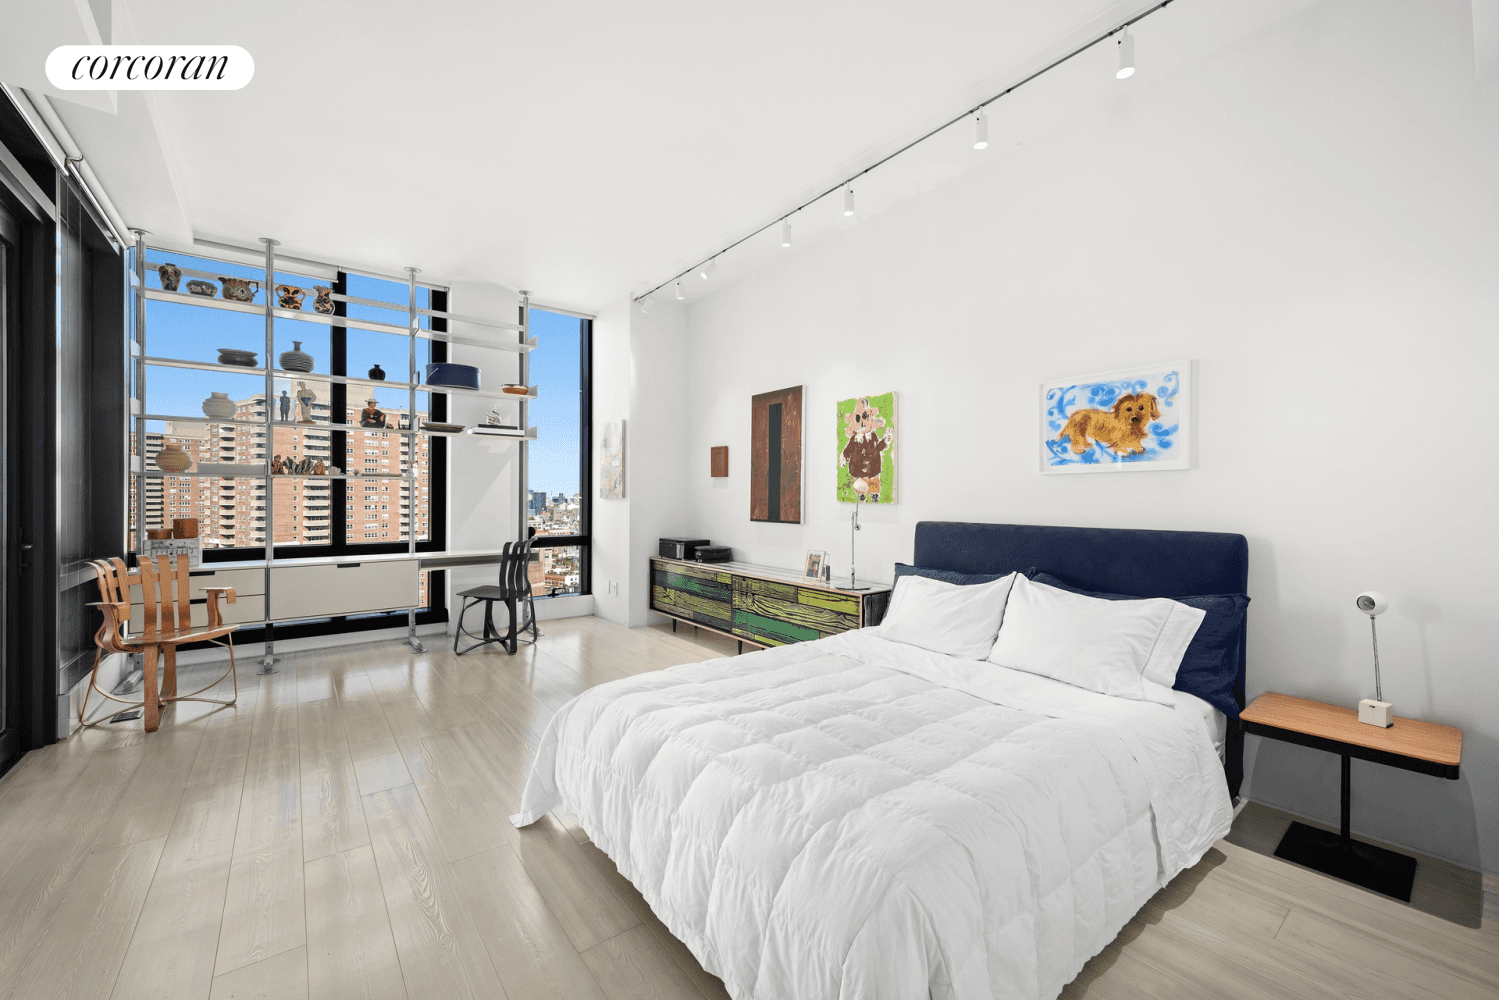 Magnificent NW corner loft like condominium tower residence, with spectacular water and city views, perched high up on the 26th floor at 101 Warren Street in southern Manhattan's desirable Tribeca ...